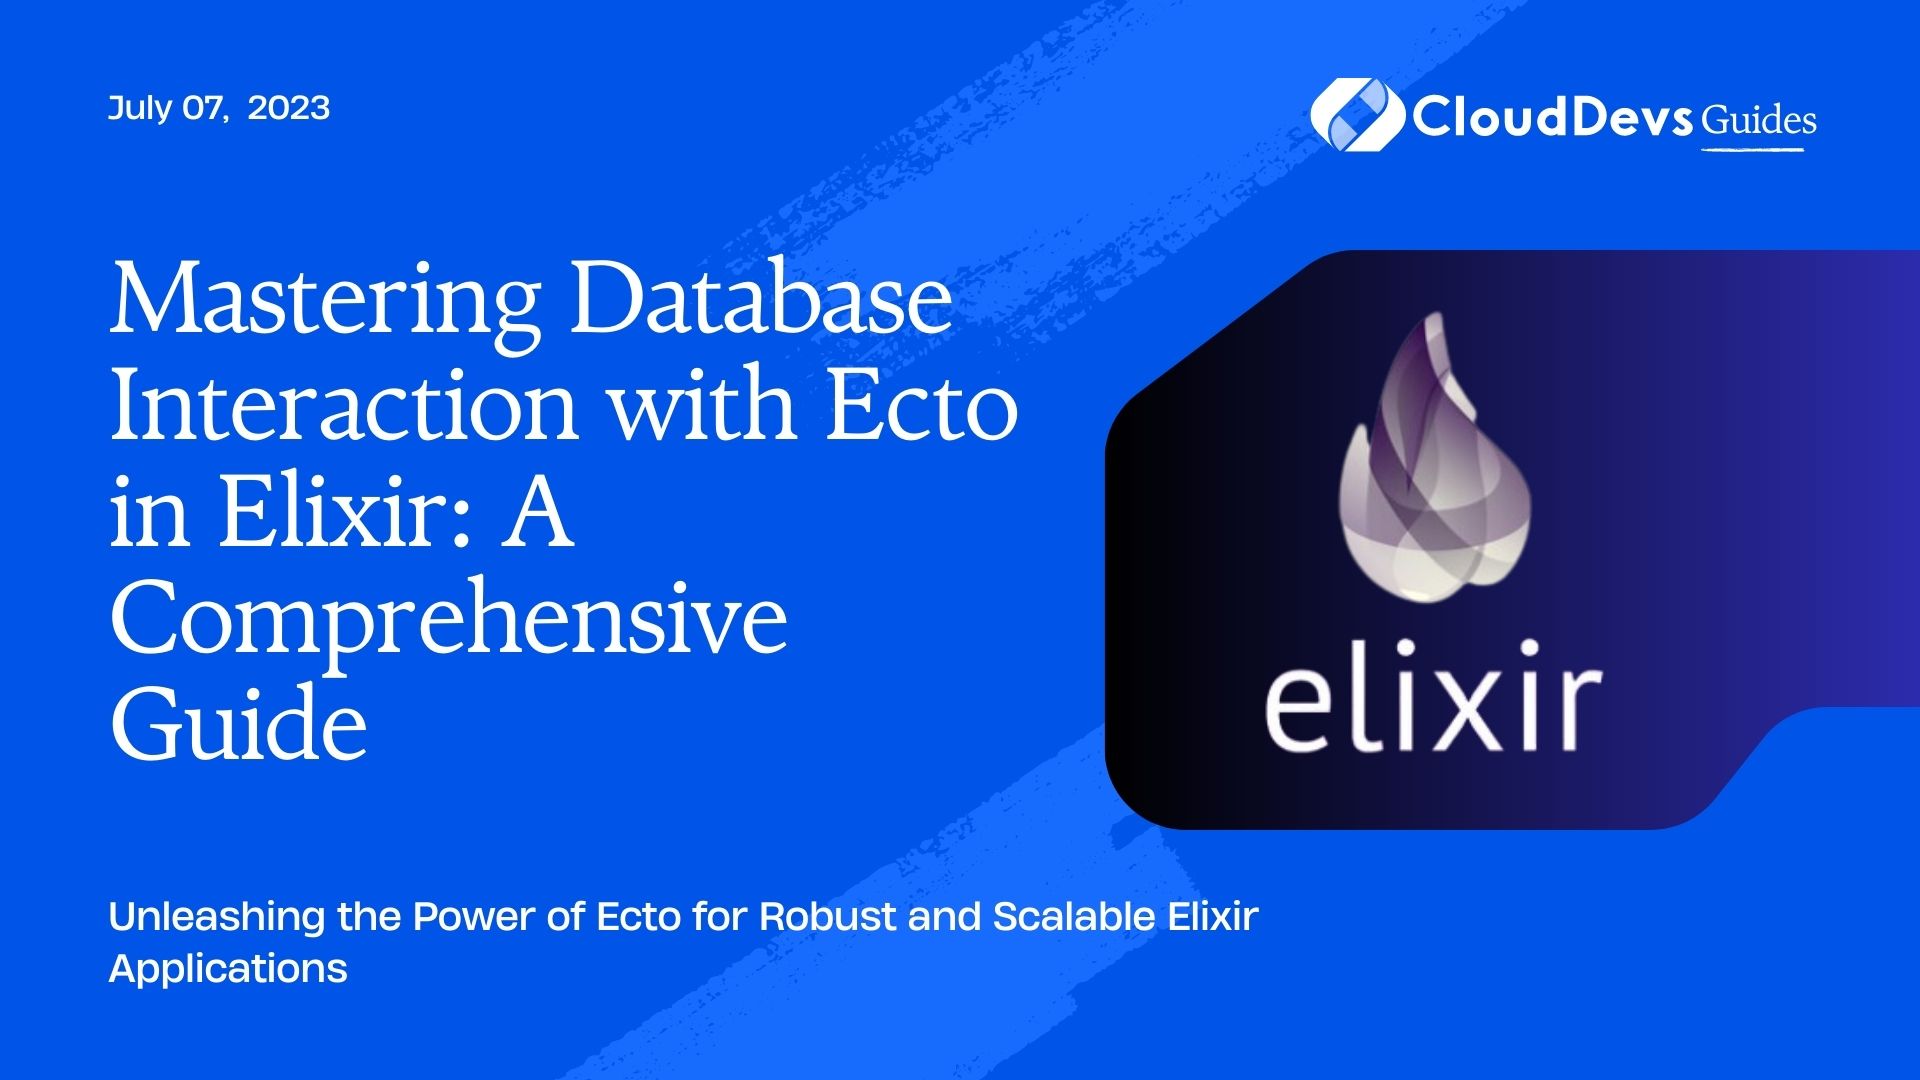 Mastering Database Interaction with Ecto in Elixir: A Comprehensive Guide